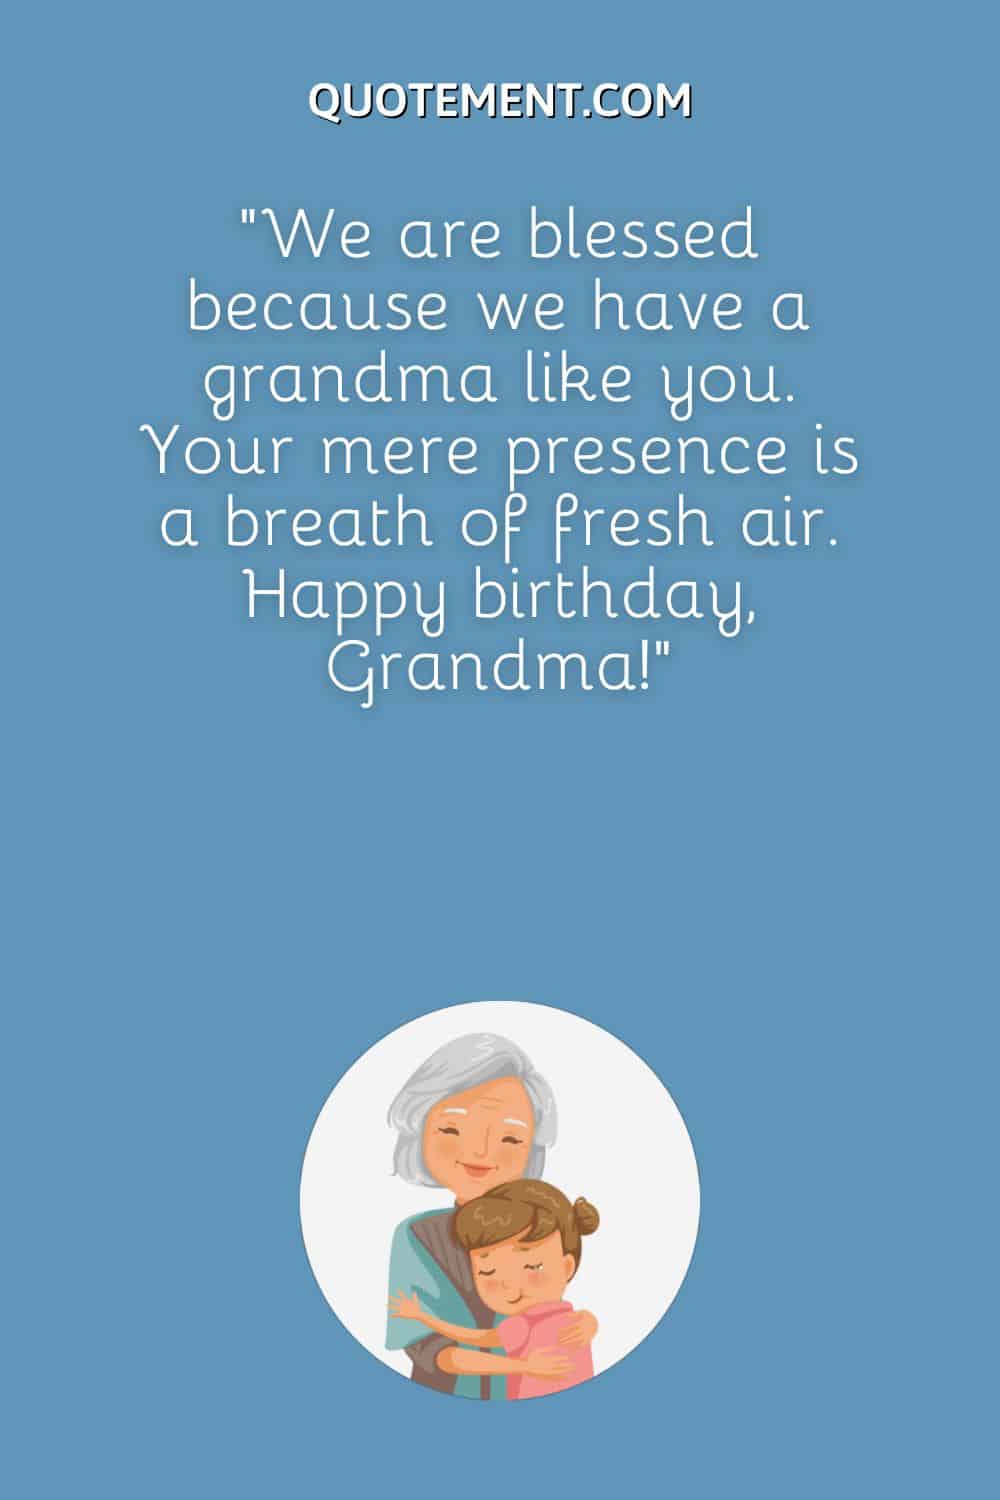 We are blessed because we have a grandma like you